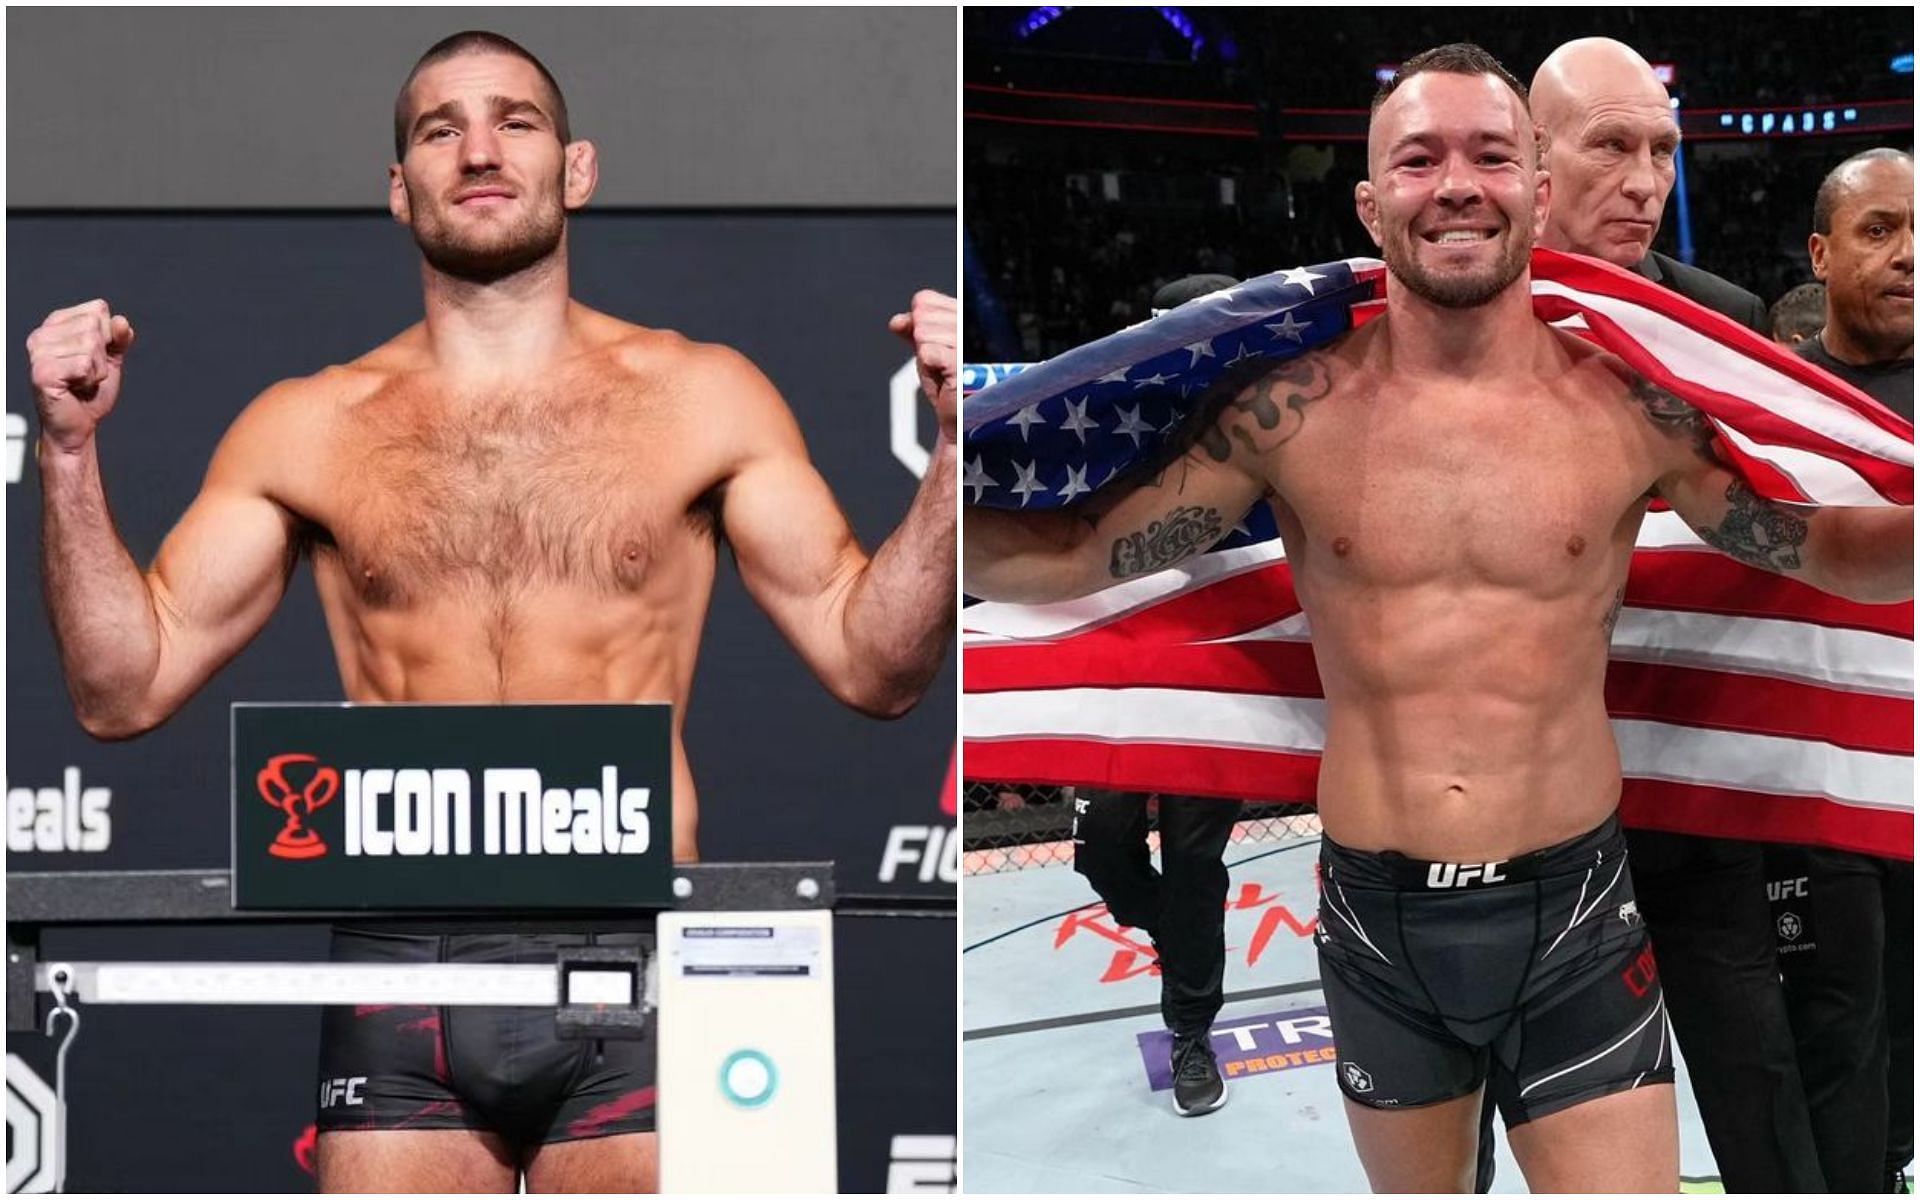 Sean Strickland disapproves Colby Covington